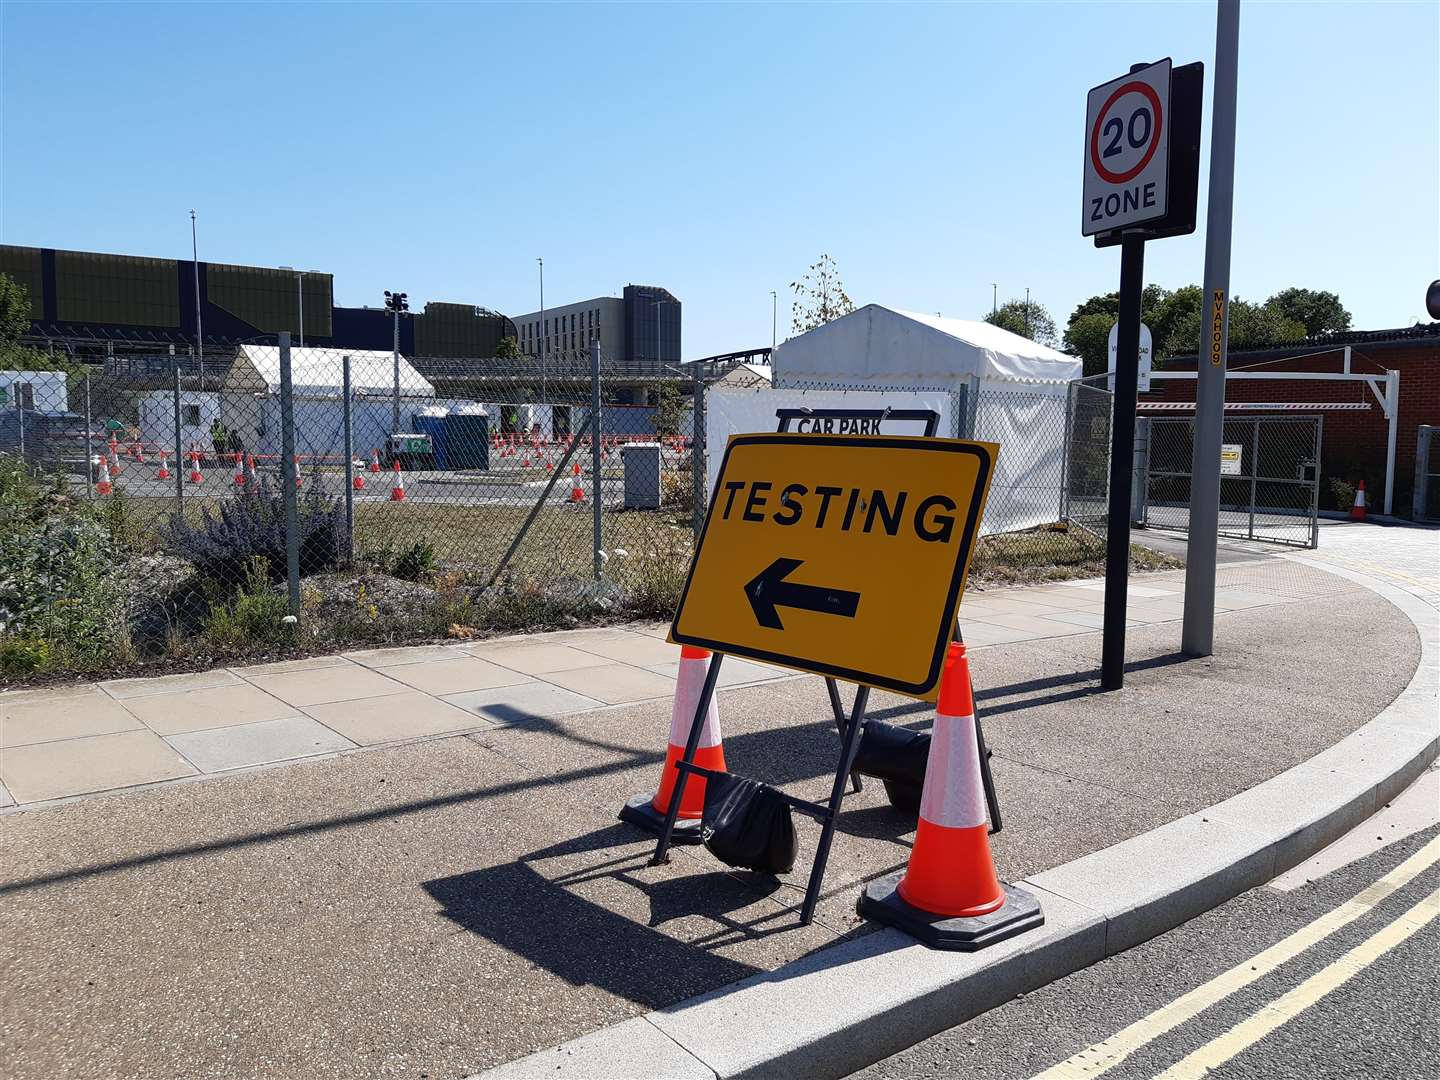 The coronavirus testing centre in Ashford has been set up on the Victoria Road car park. Picture: Dan Wright